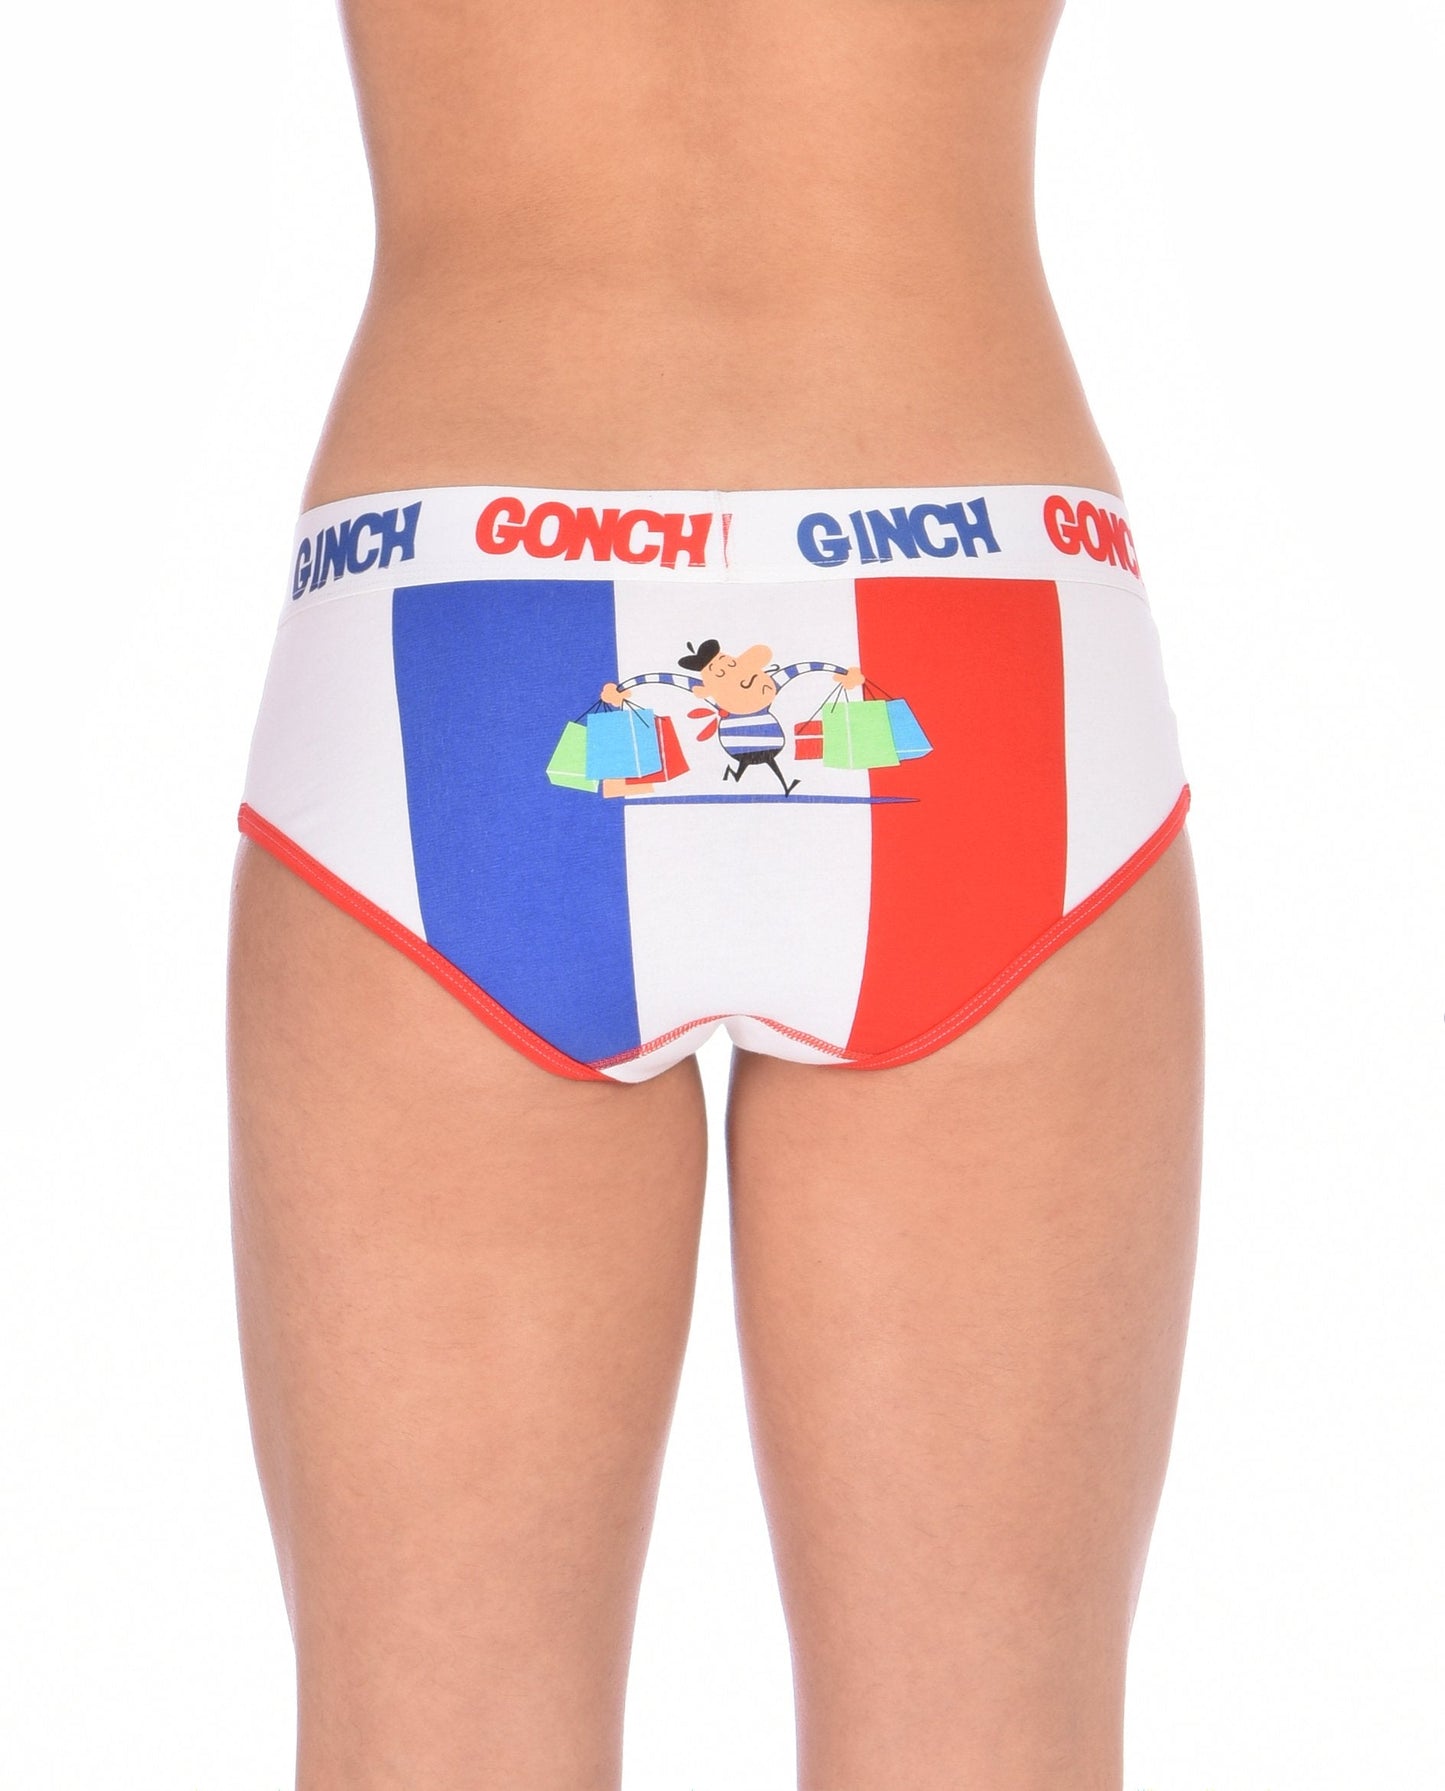 GG Ginch Gonch I Love Paris boy cut Brief - y front women's Underwear white fabric with scene of french flag and french person red and white trim and white printed waistband front